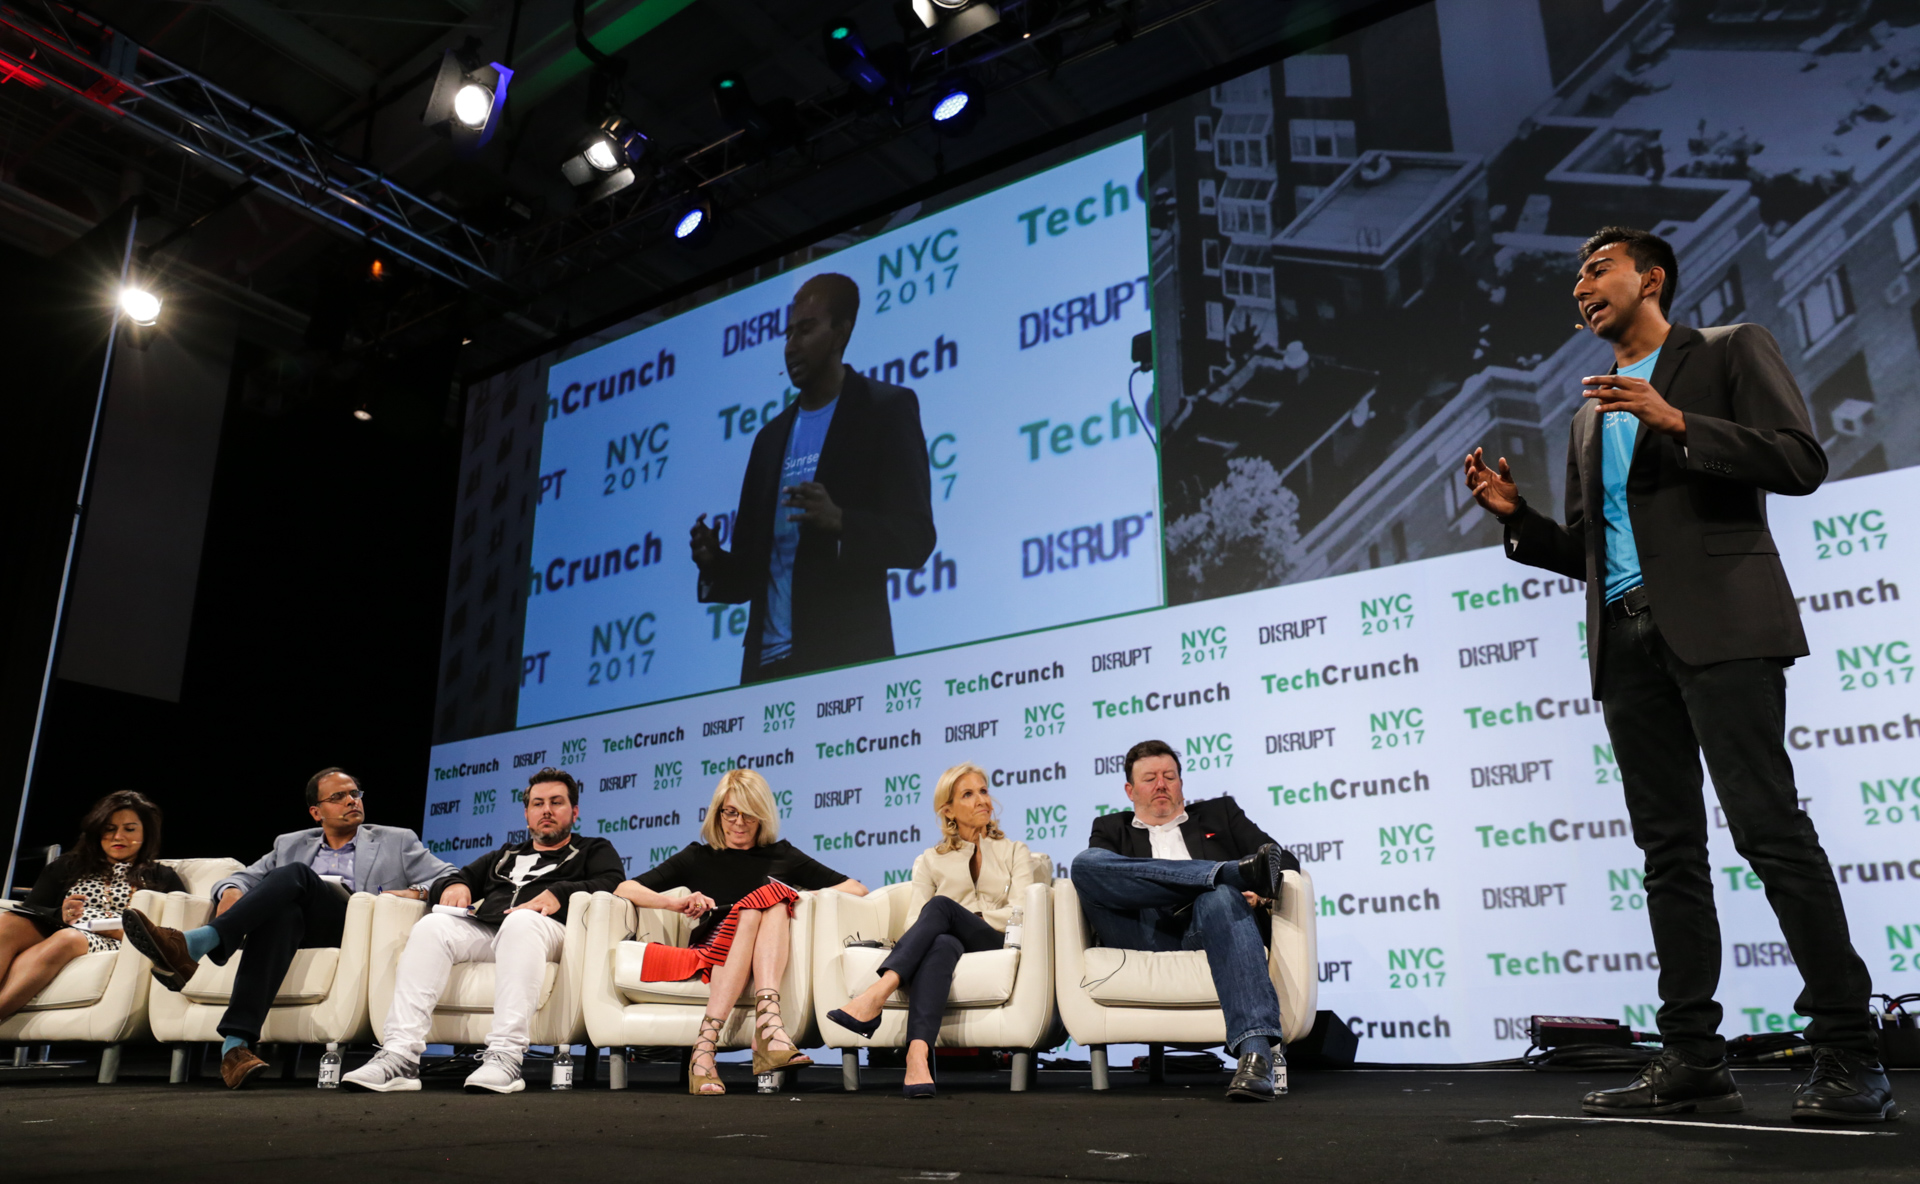 And the winner of Startup Battlefield at Disrupt NY 2017 is ...